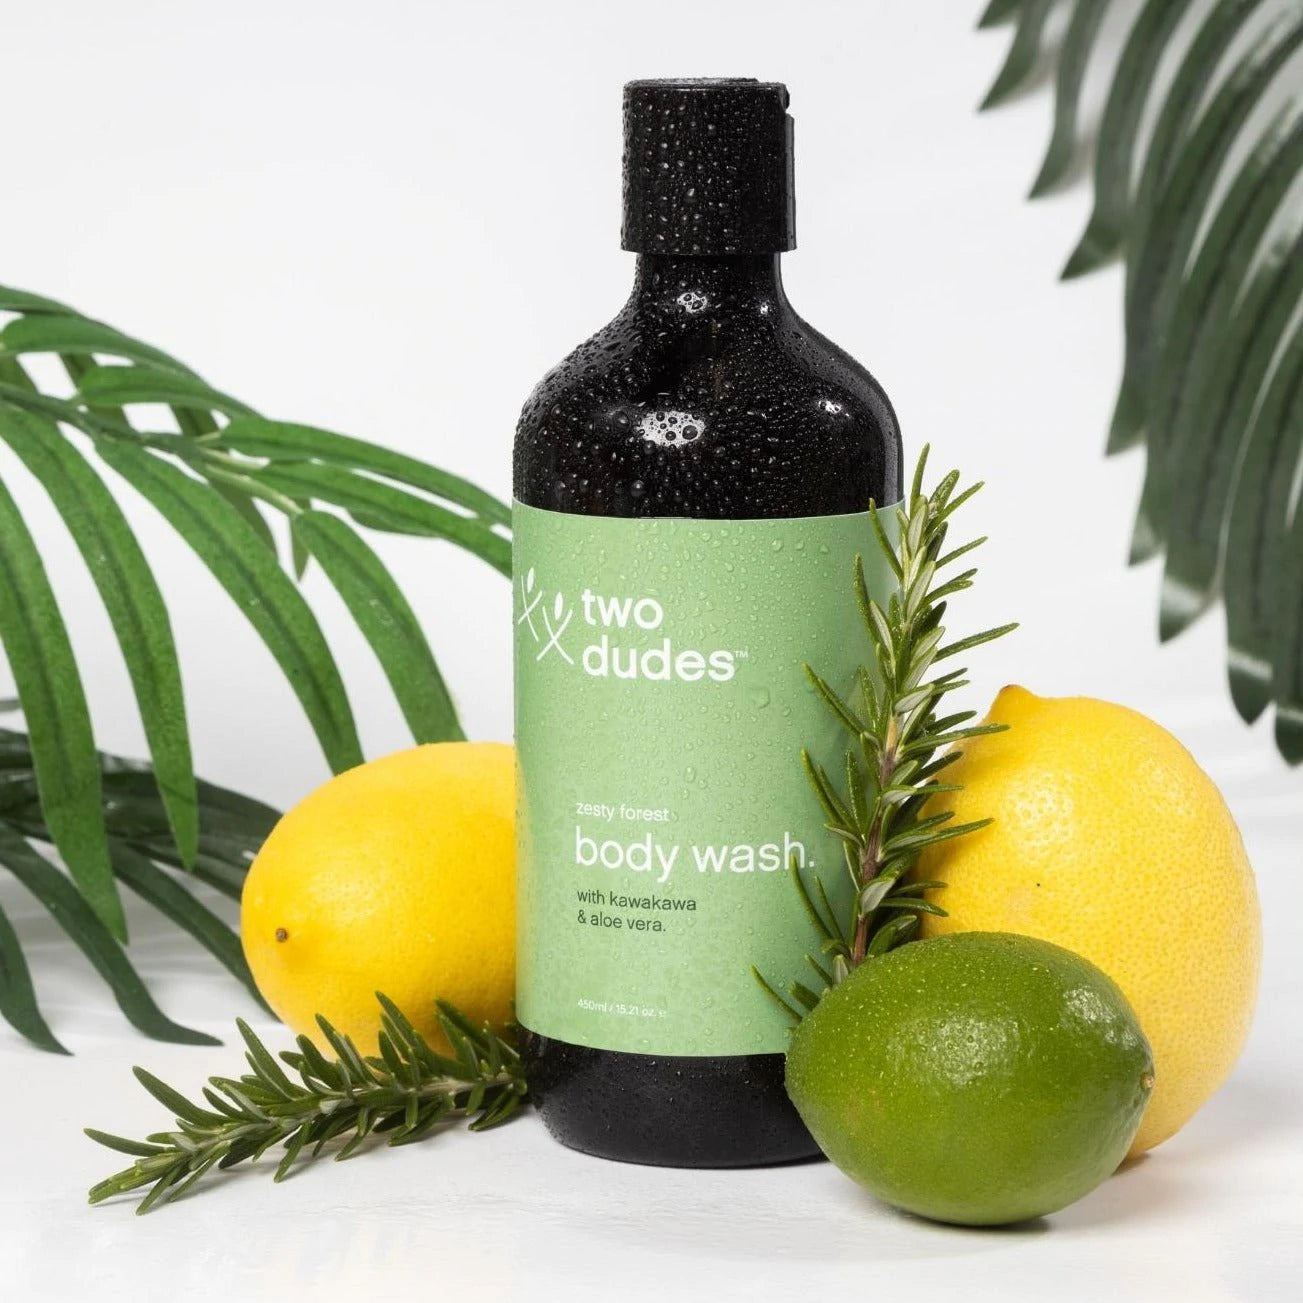 A bottle of "giftbox co. His body wash" with a green label, surrounded by fresh lemons, a lime, and sprigs of rosemary against a white background.